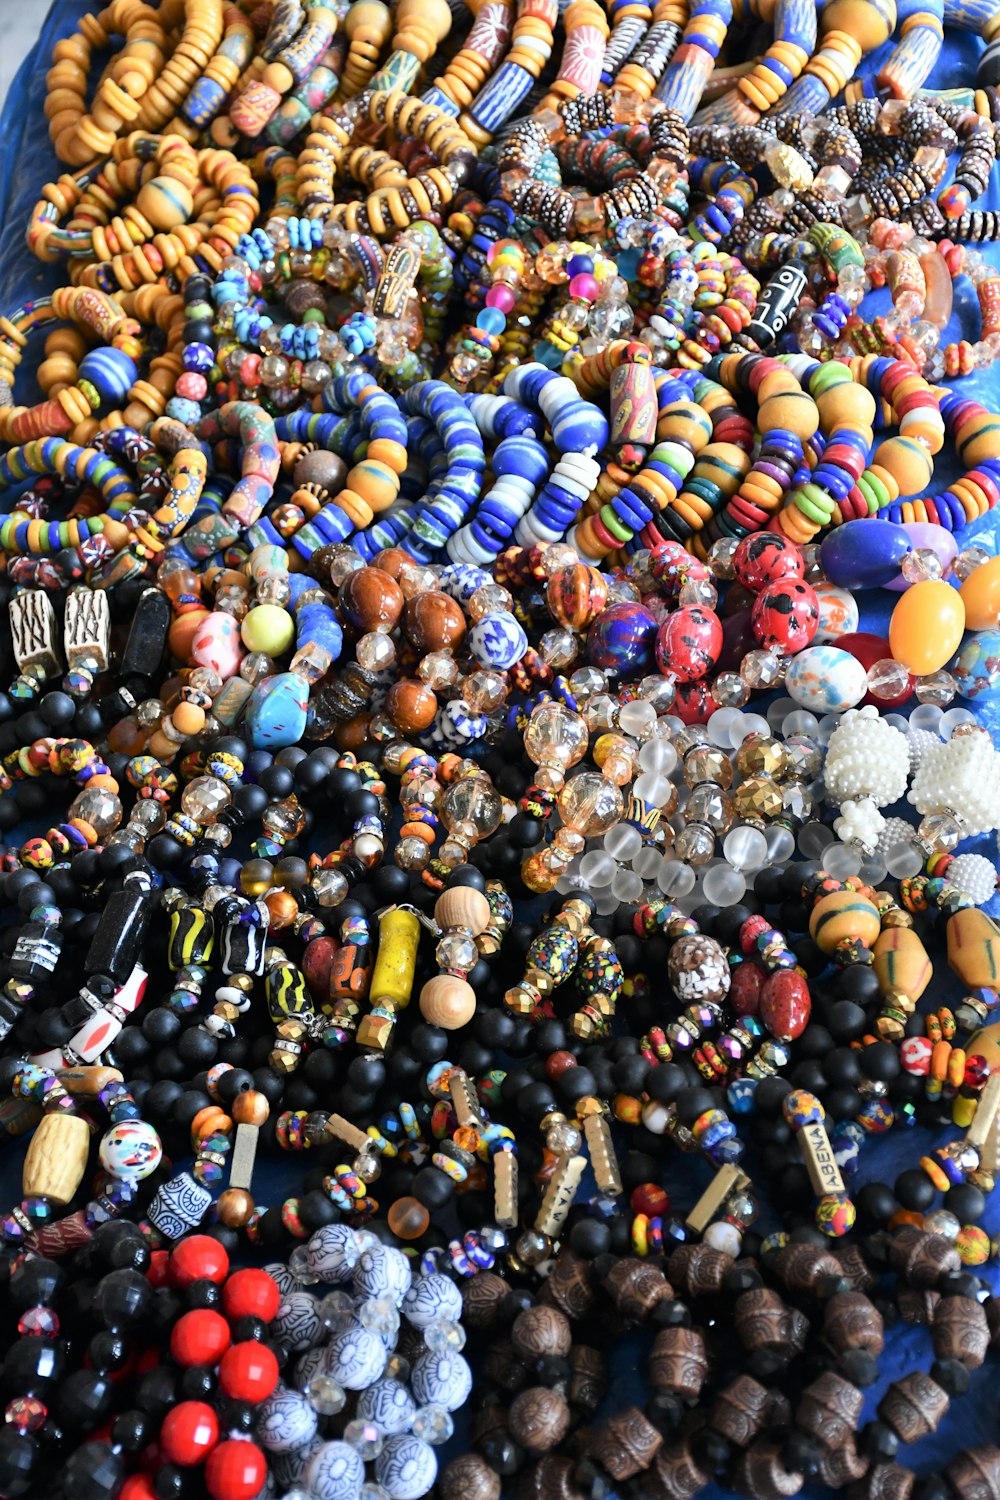 a large amount of beads and necklaces on display